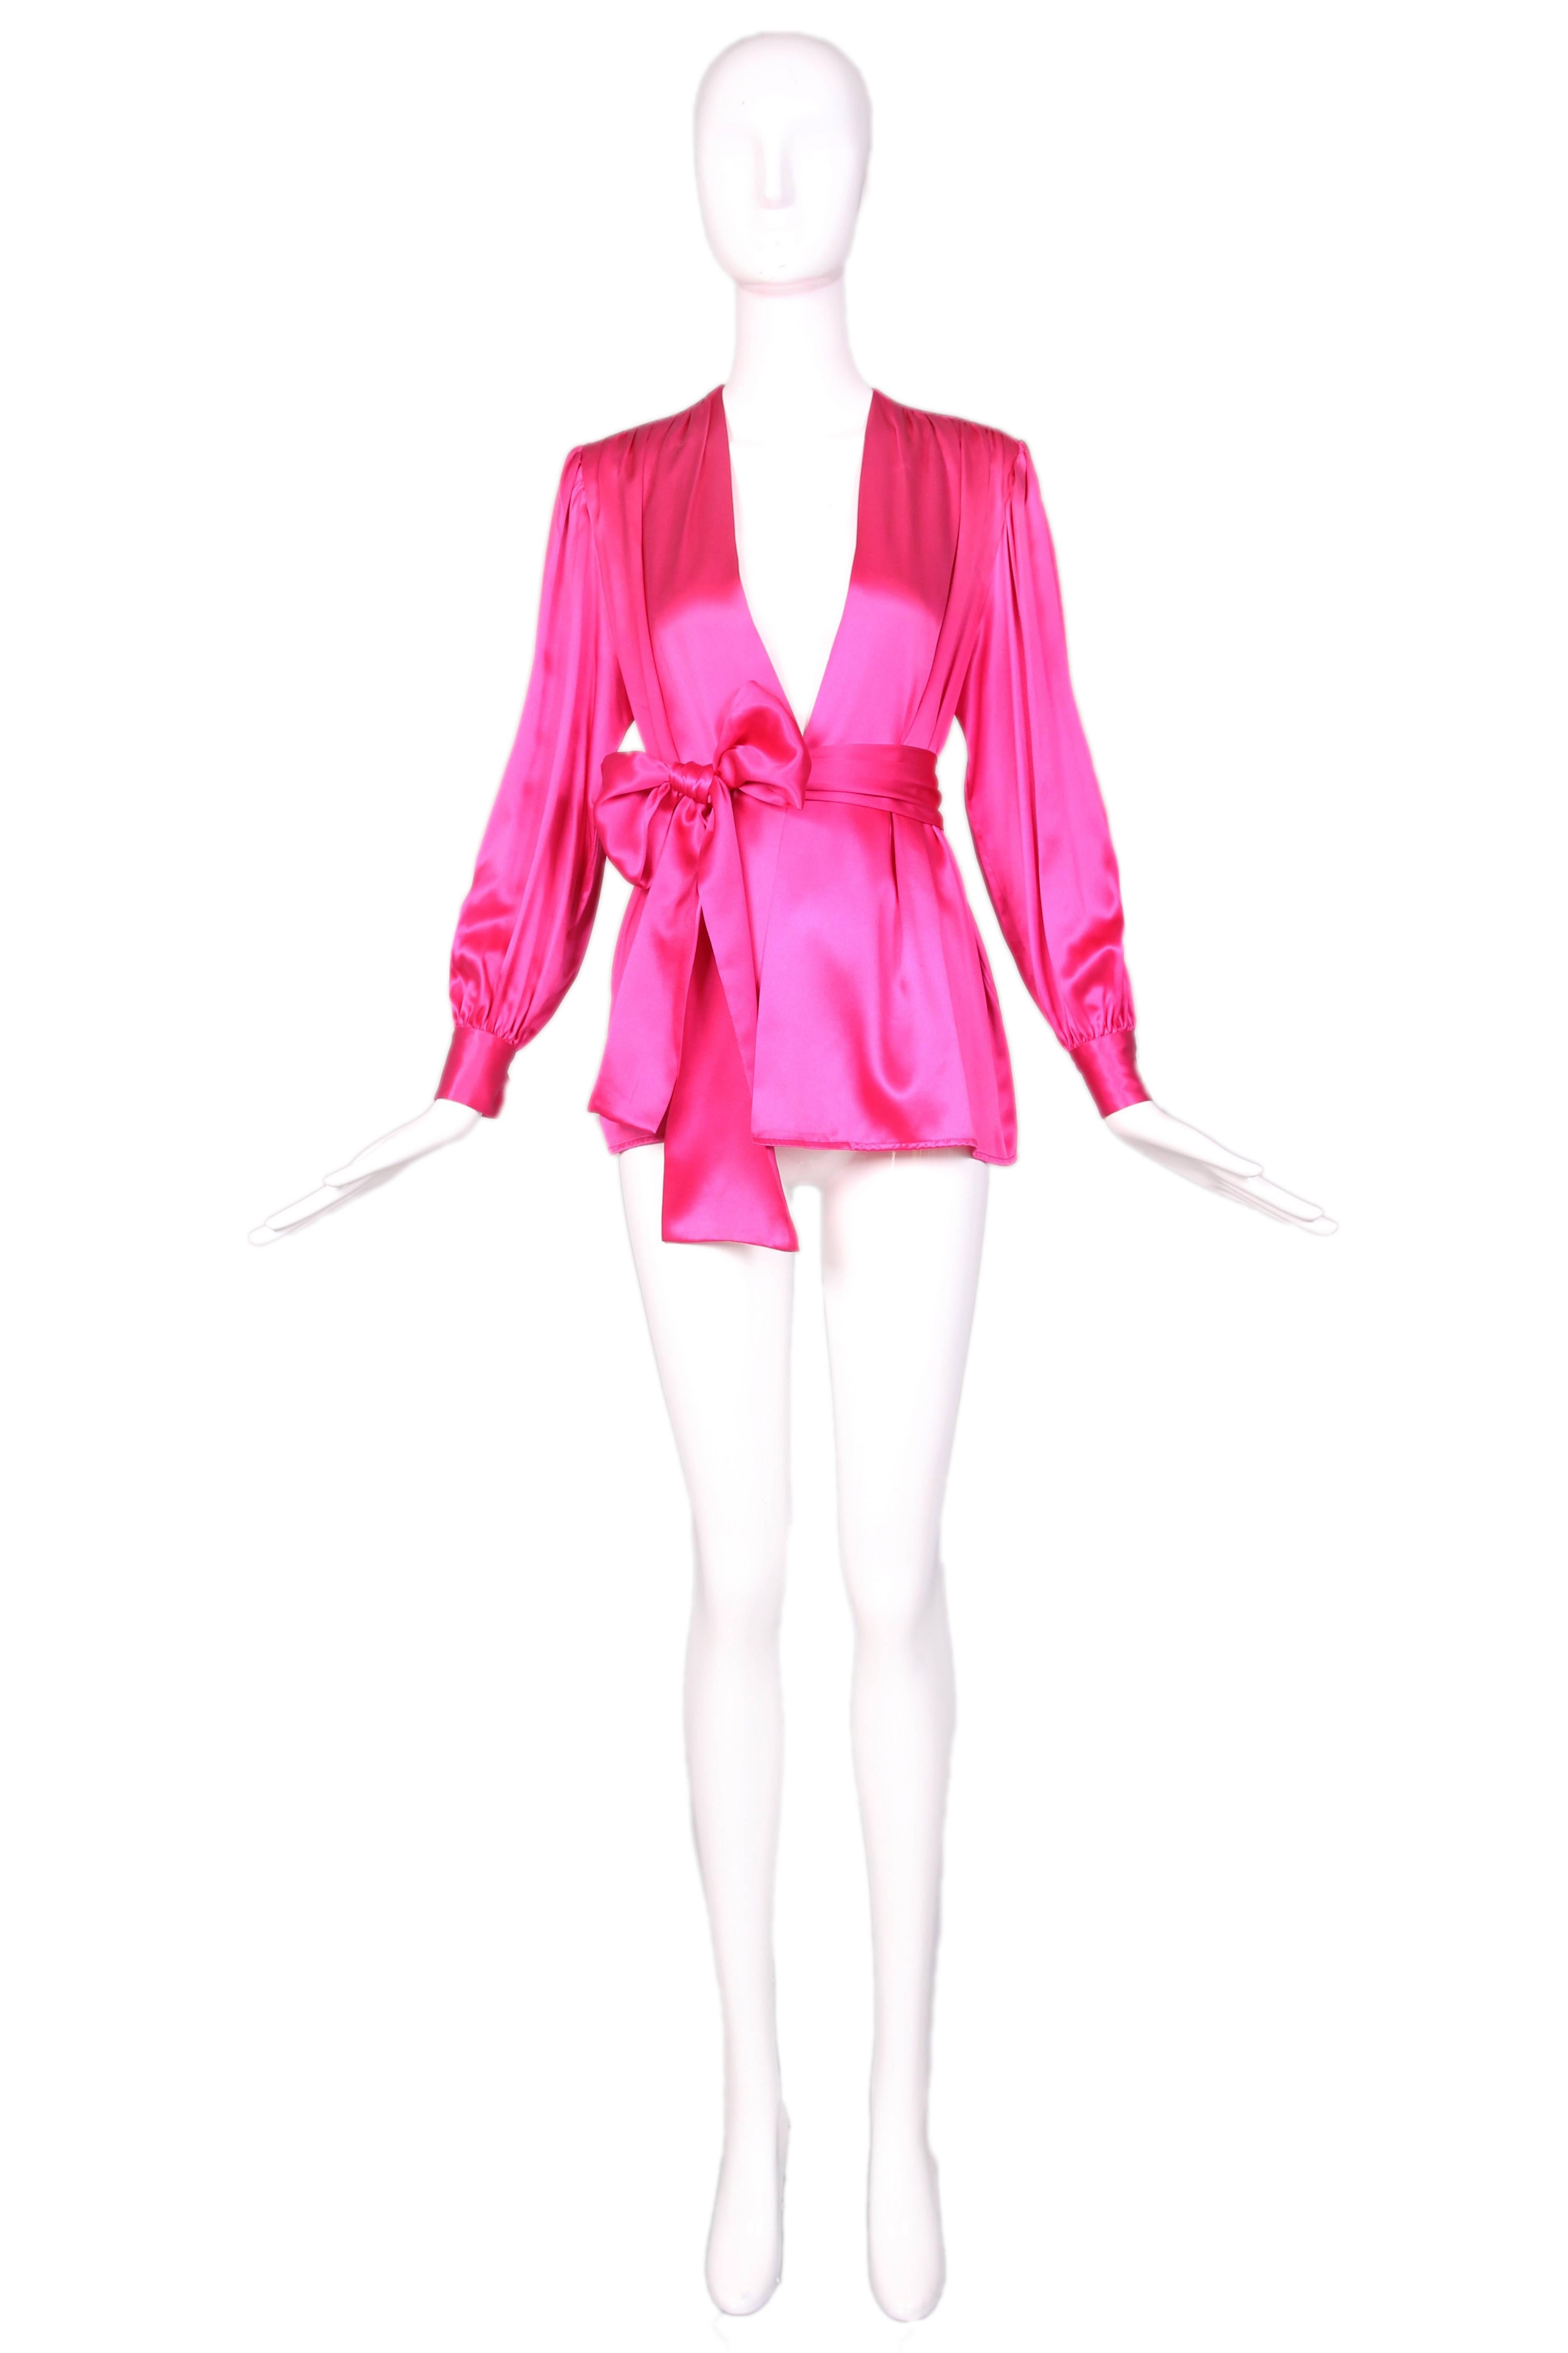 Yves Saint Laurent hot pink silk blouse top w/matching sash. In excellent condition. Size EU 44. 
MEASUREMENTS:
Bust - 40